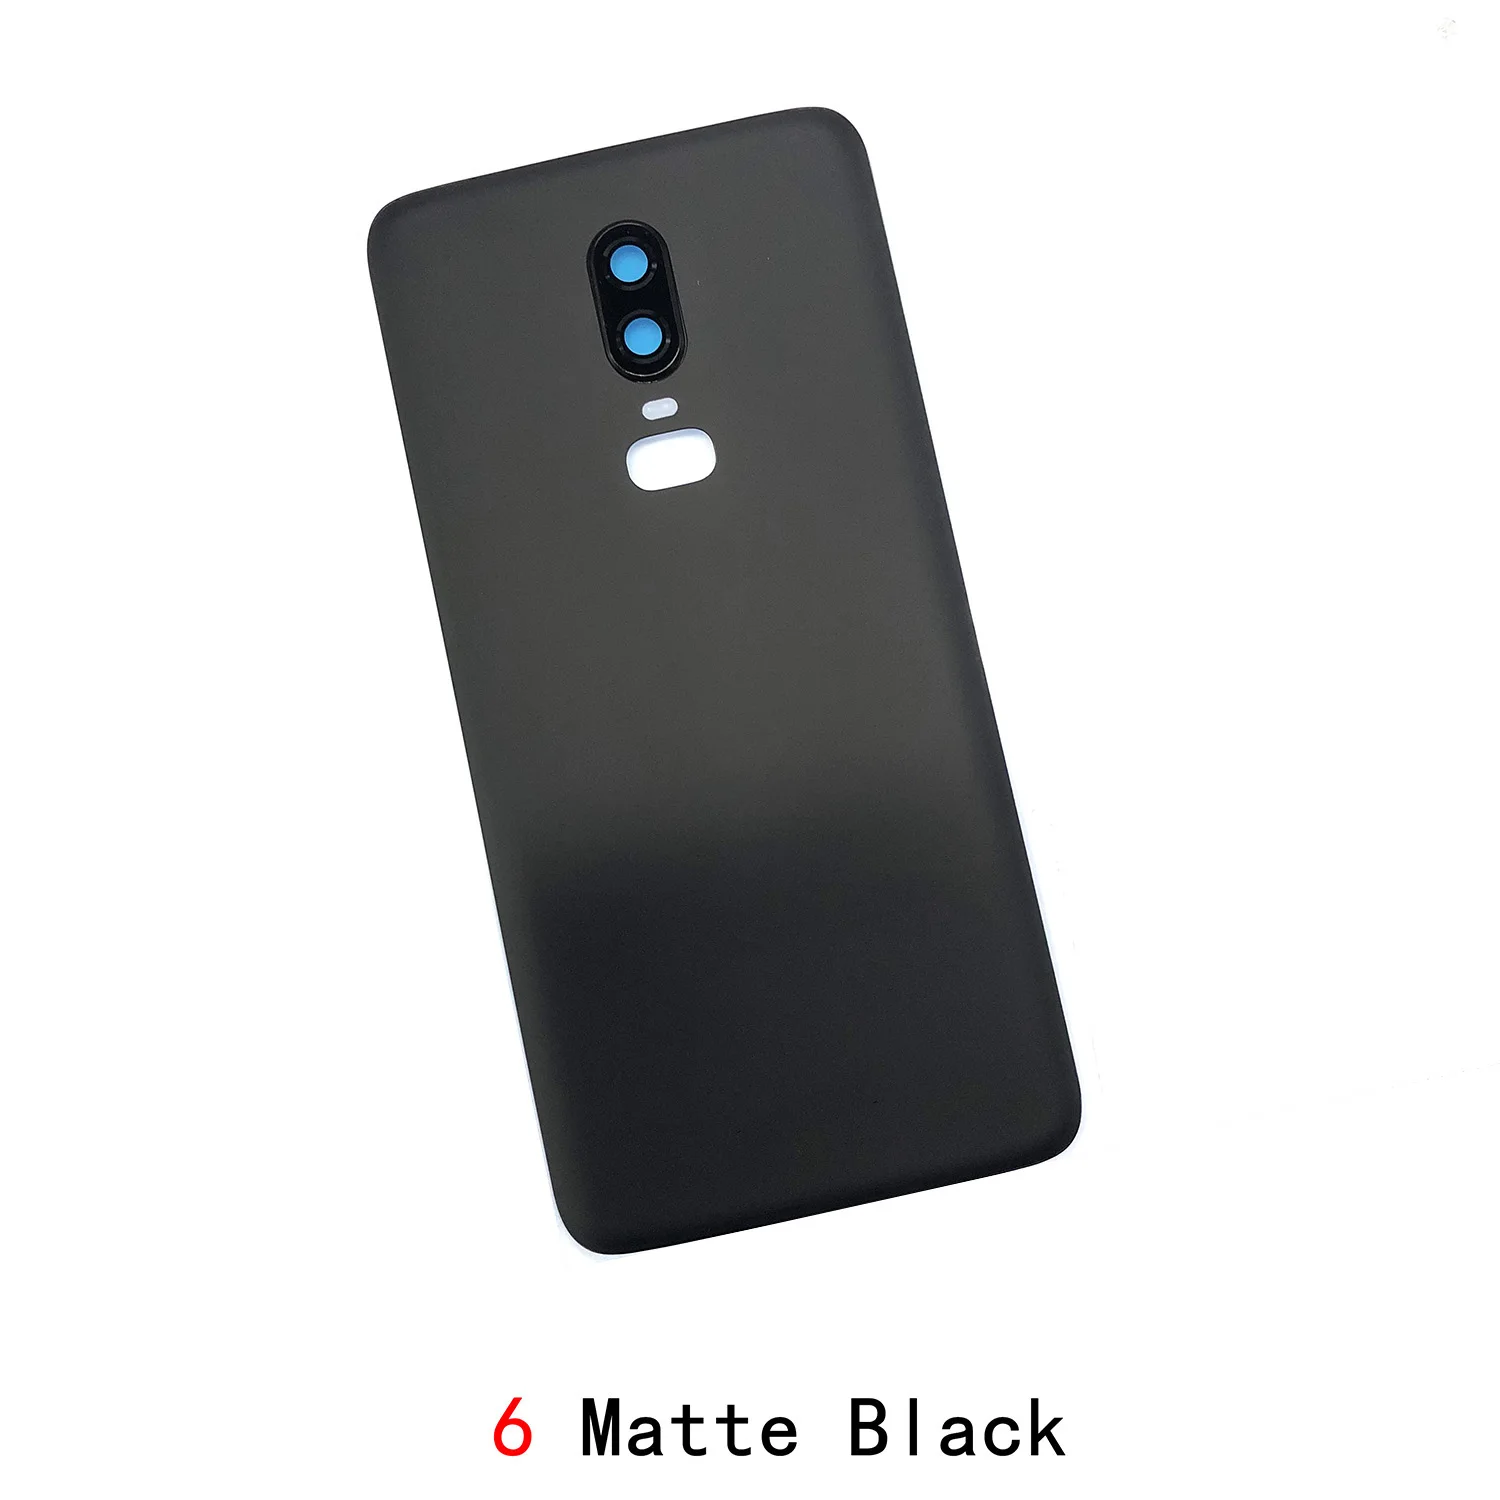 New For Oneplus 6 6T Battery Back Cover Housing Rear Door Case Replace Battery Cover With Camera Lens